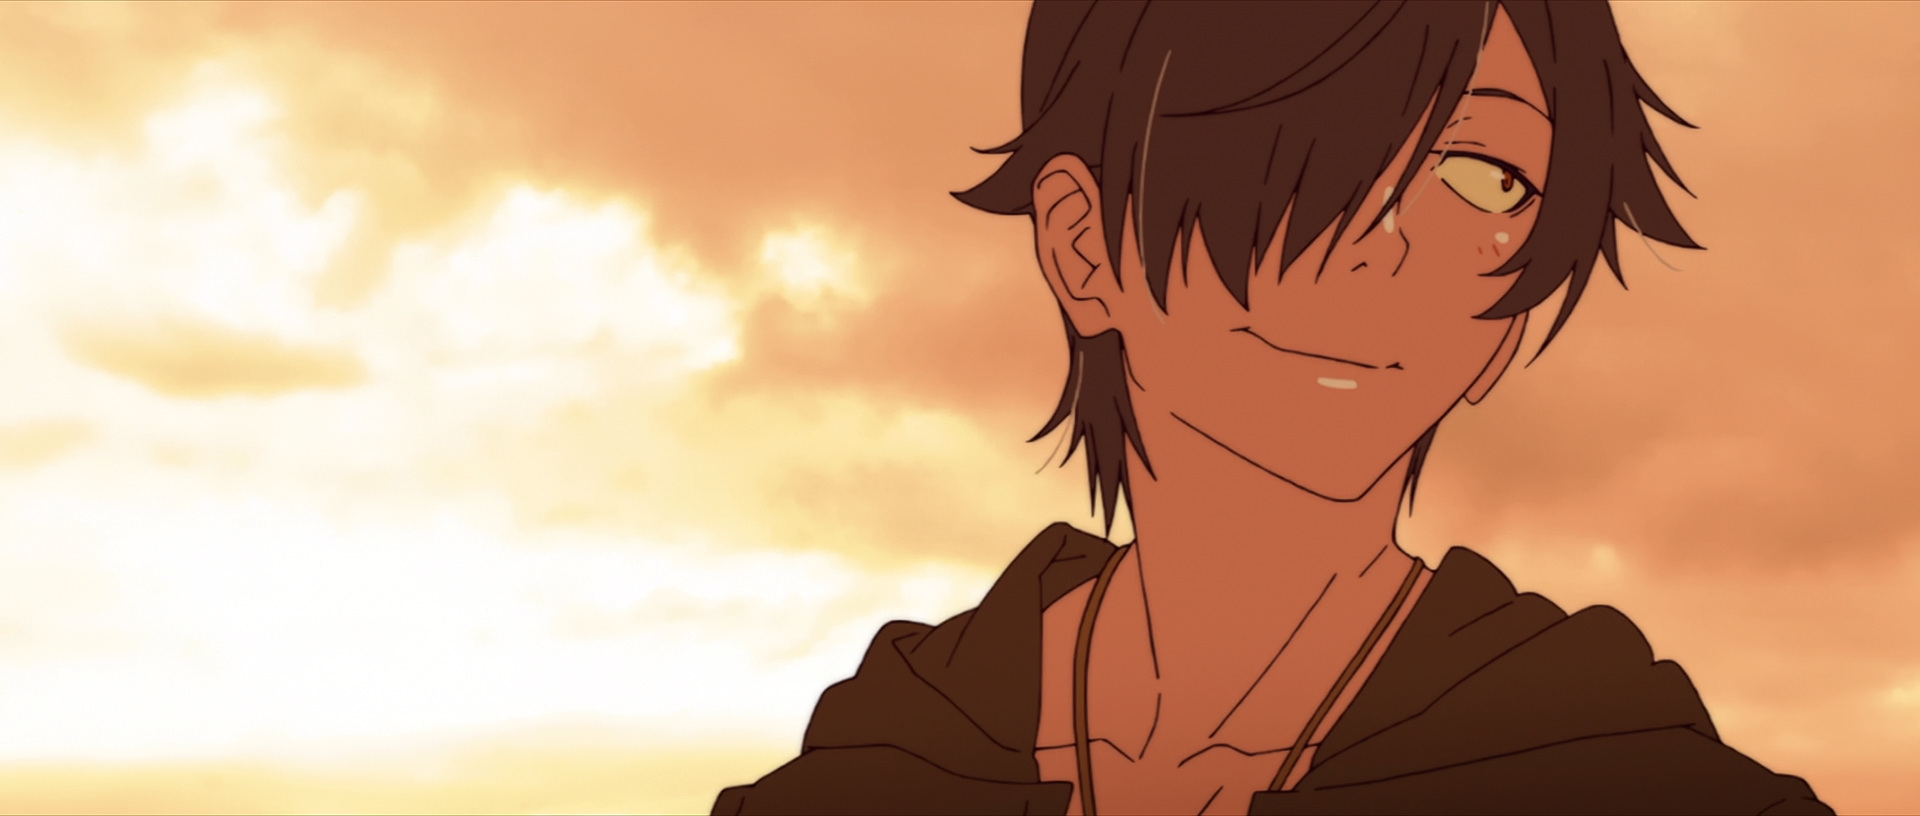 Kizumonogatari continues to prove to be an unforgettable watch. 